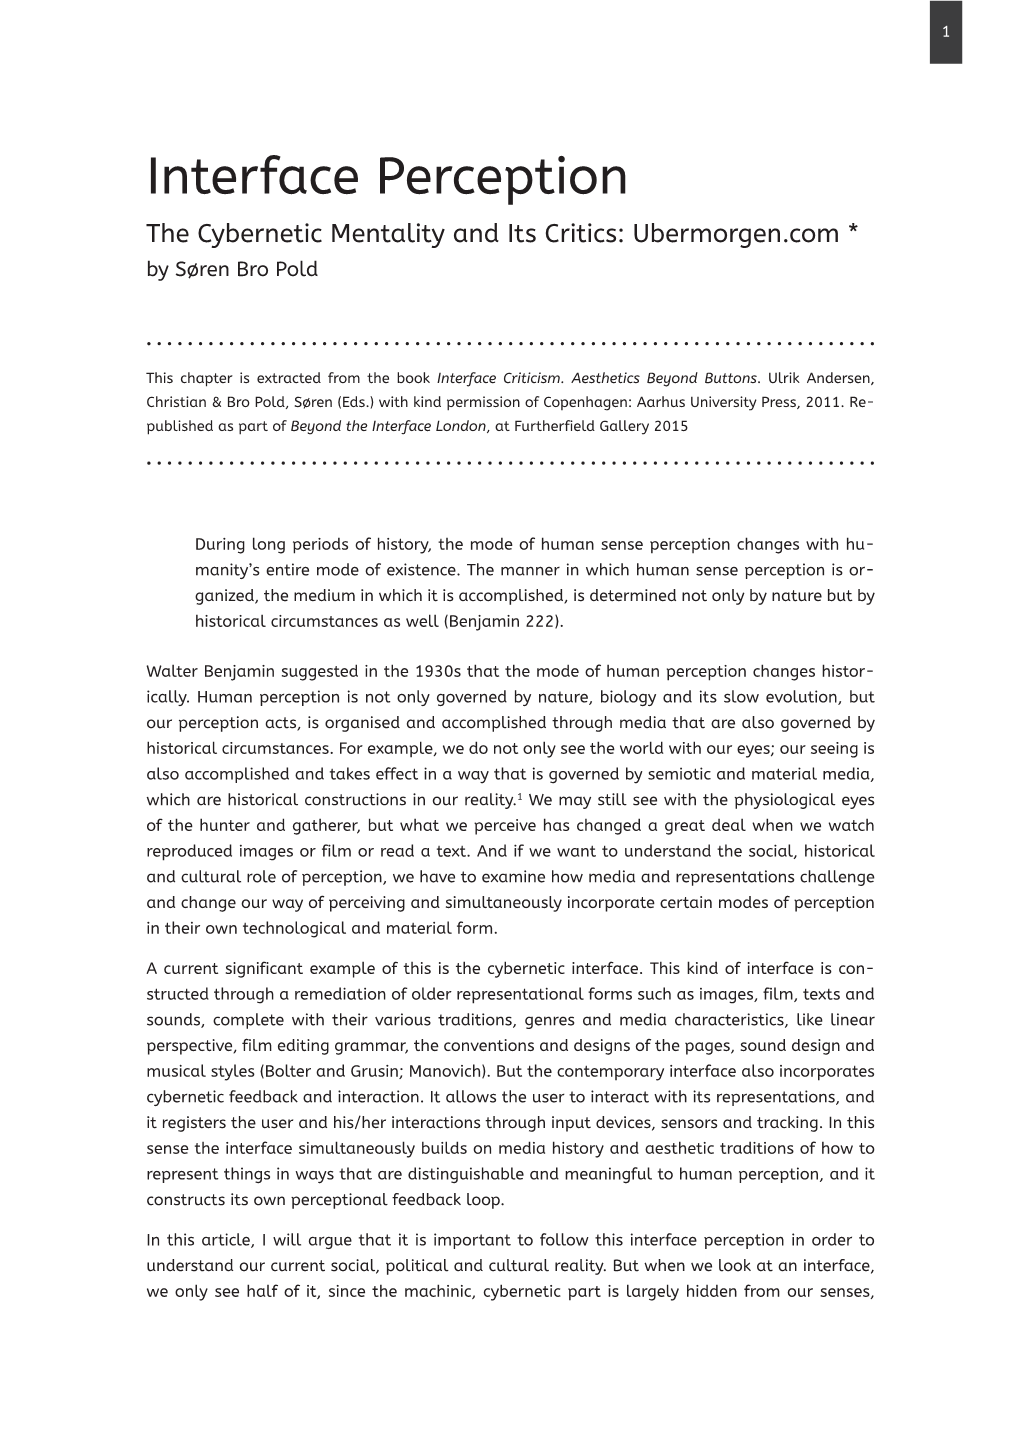 Interface Perception the Cybernetic Mentality and Its Critics: Ubermorgen.Com * by Søren Bro Pold